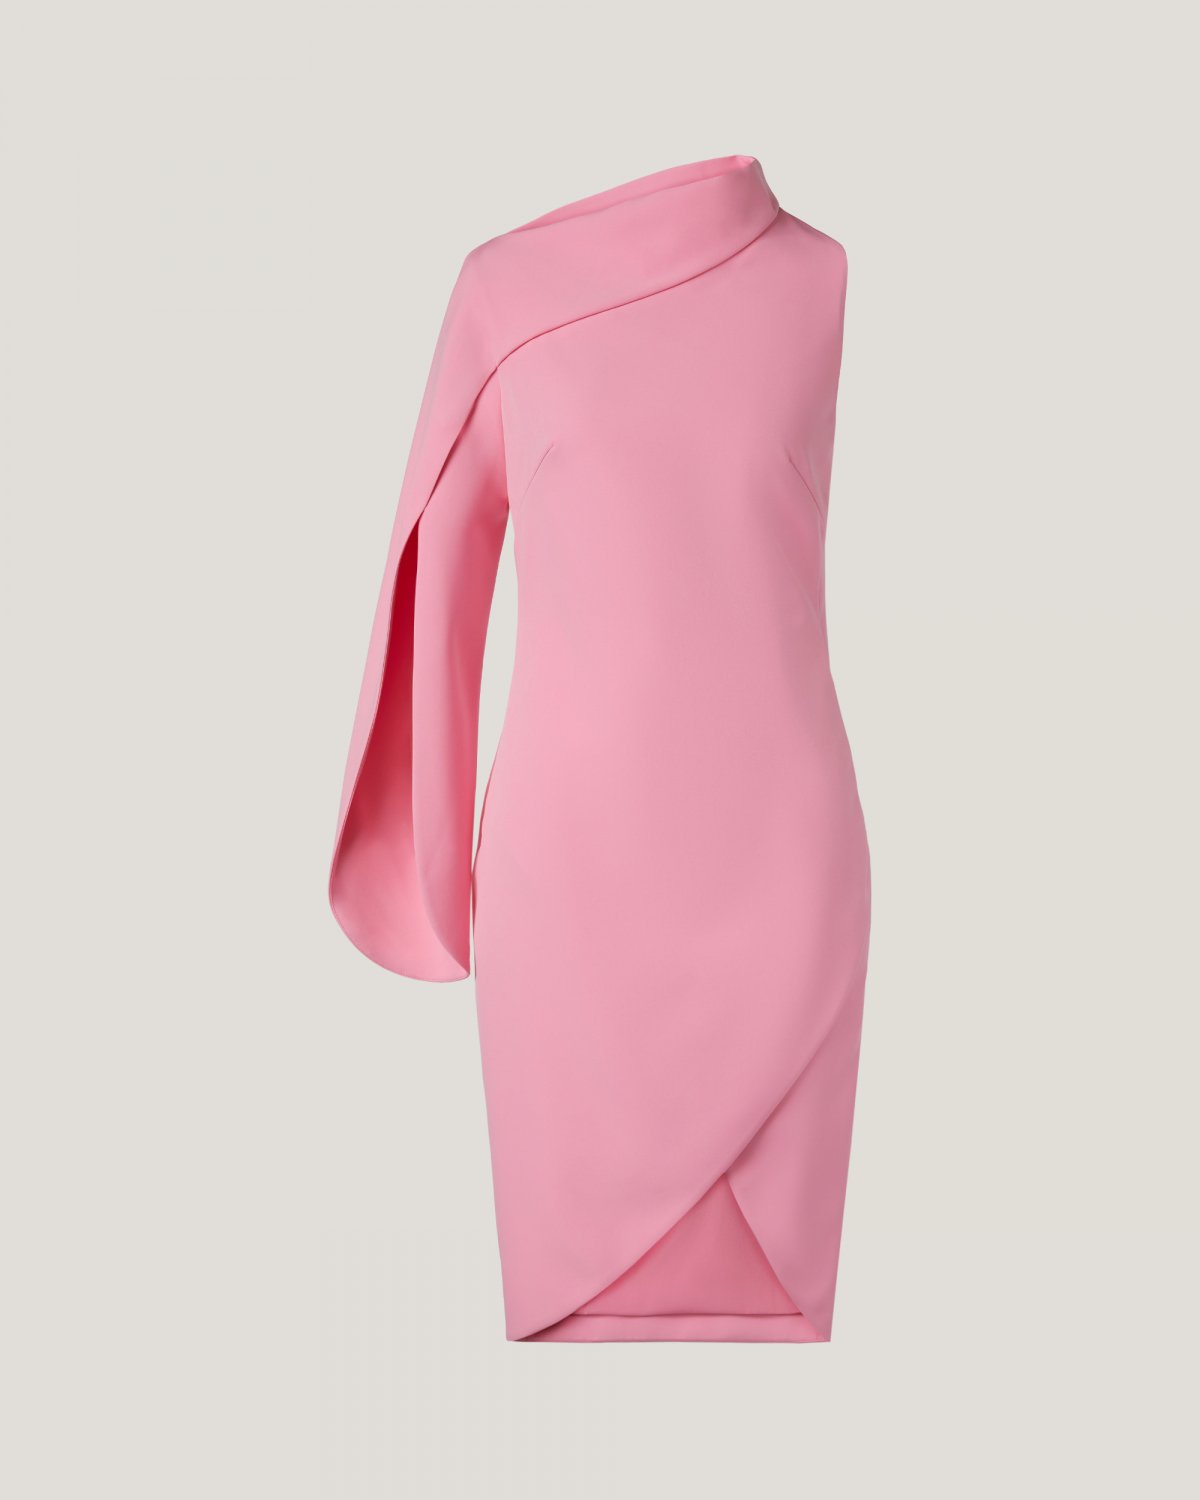 Petal sleeve pink cocktail dress | Cruise 2023 Collection, Warm weather wear, Ready to Wear, Spring days, Spring Summer 2023 Collection, Mother's Day | Genny